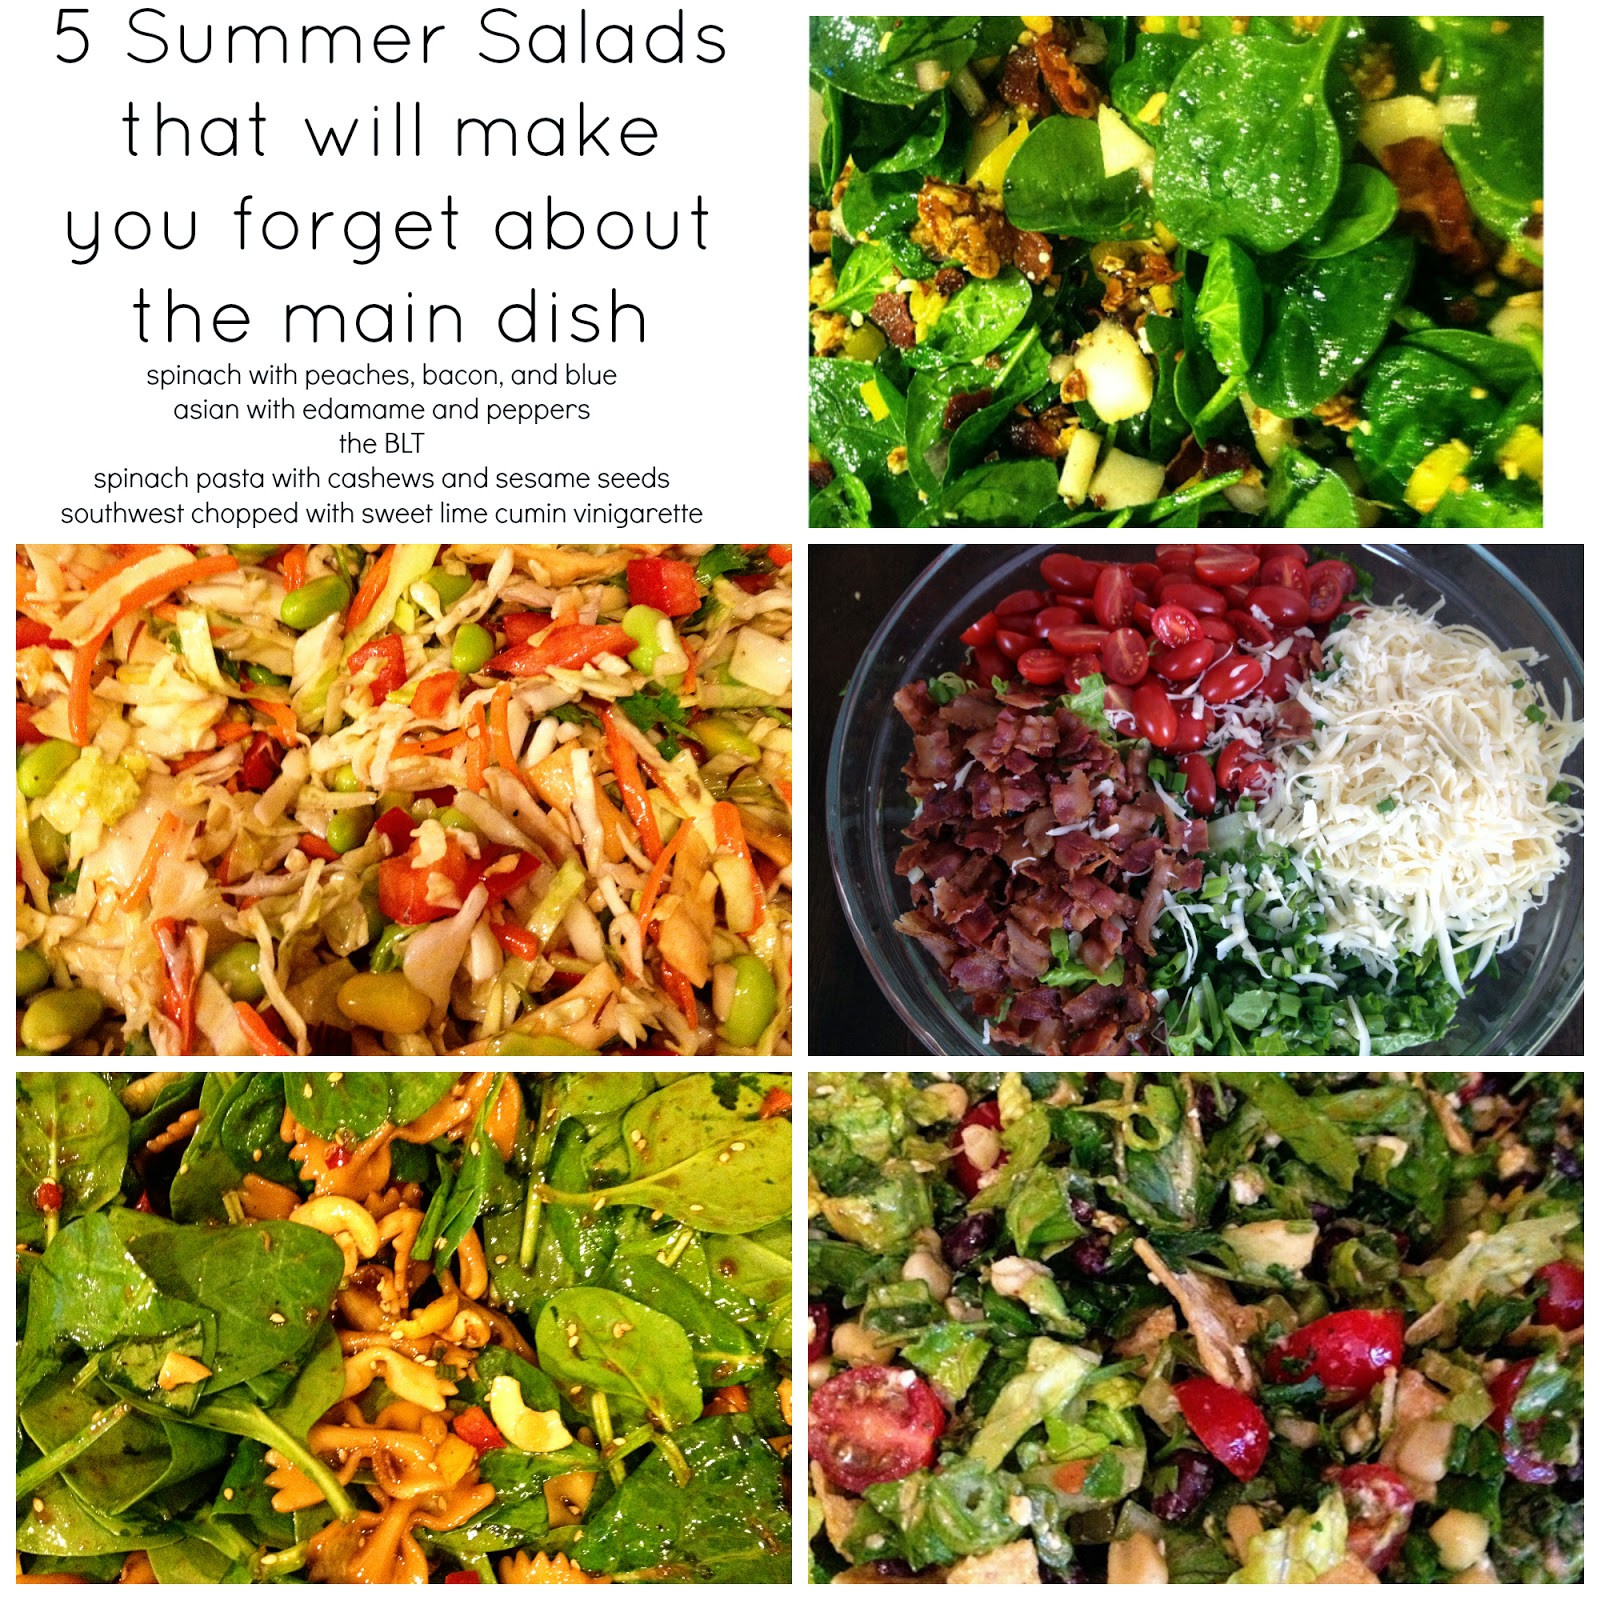 Summer Main Dish Salads
 5 Summer Salads that will make you for about the Main